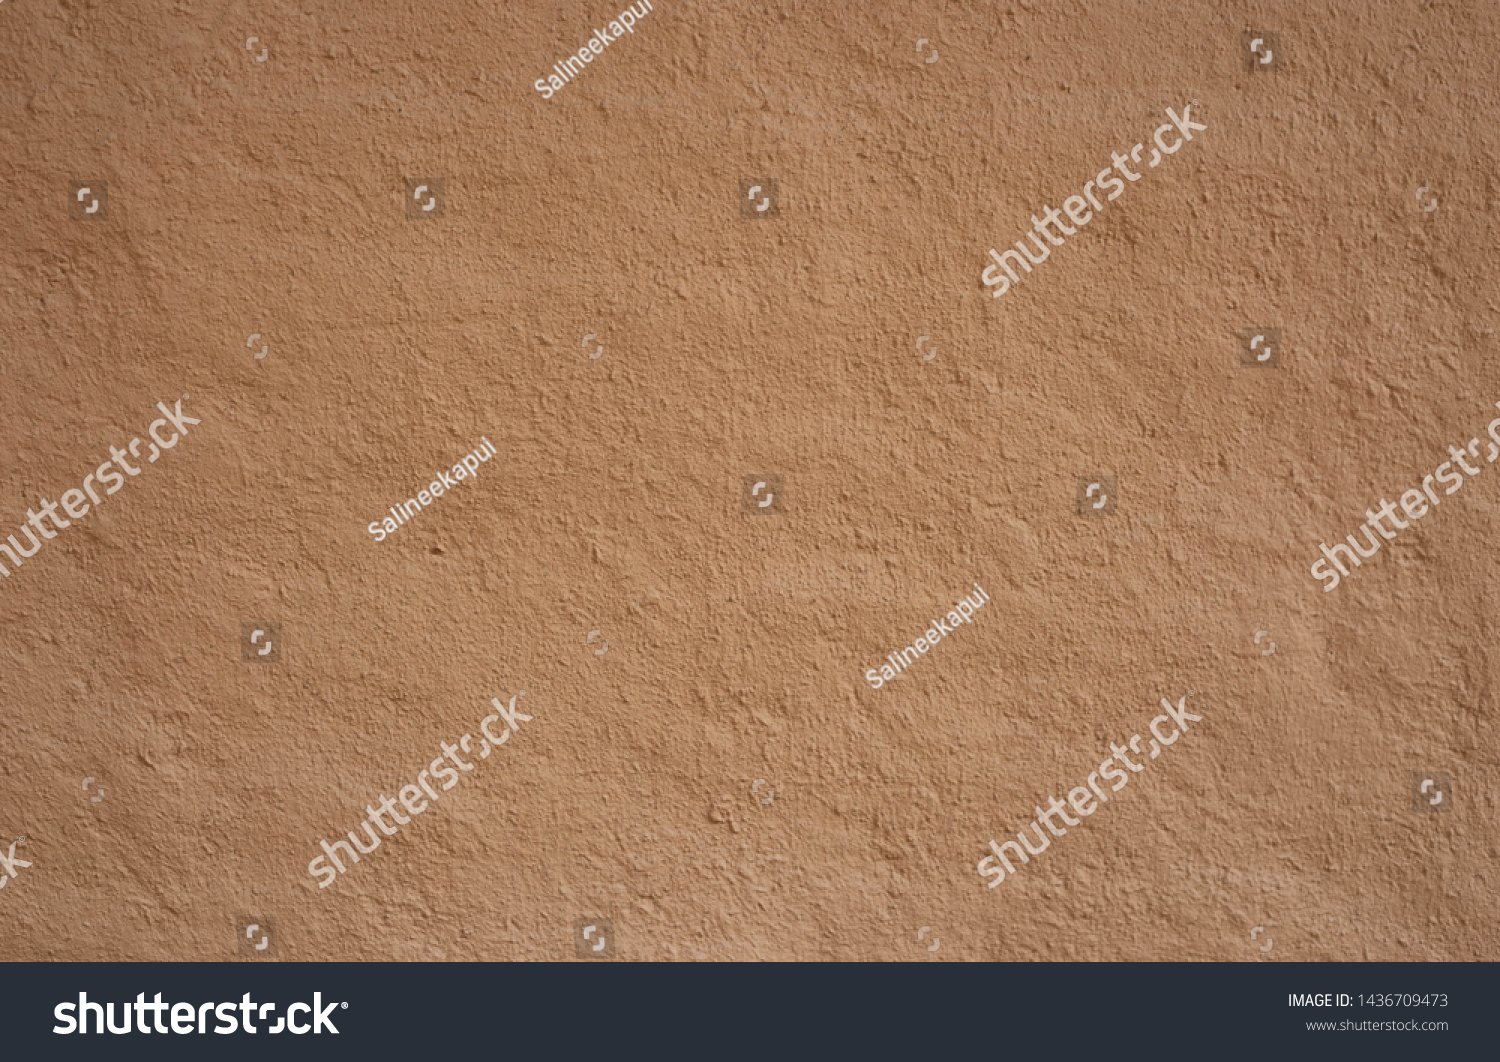 Soil wall texture of clay house structure. #1436709473